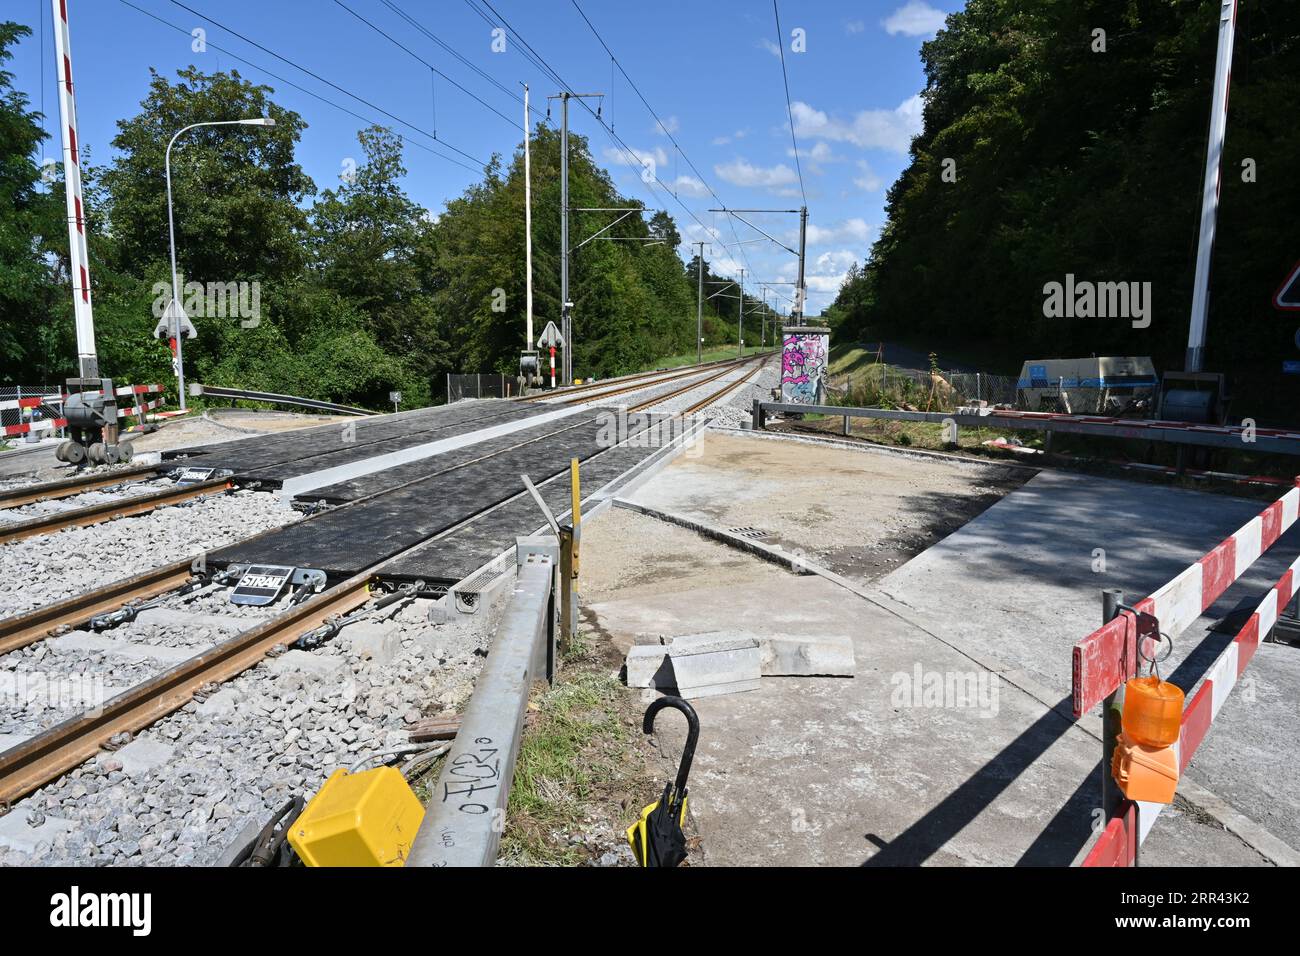 The tracks or rails and new railway crossing under construction leading to the railway station in village Urdorf in Switzerland. Stock Photo